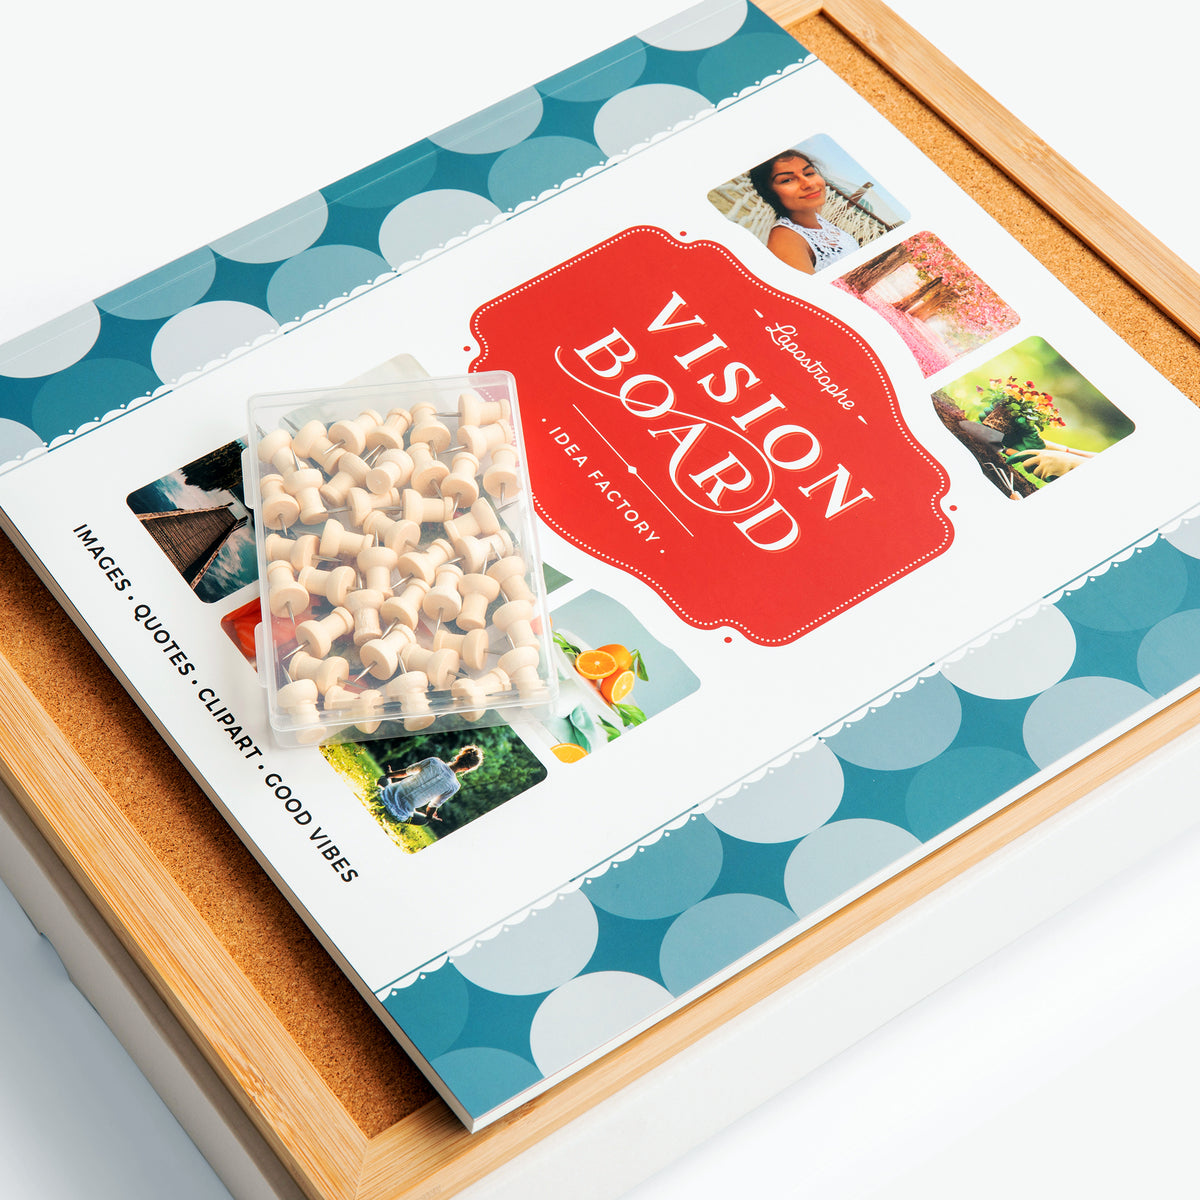  Vision Board Kit for Adults: Clip Art, Word Quotes